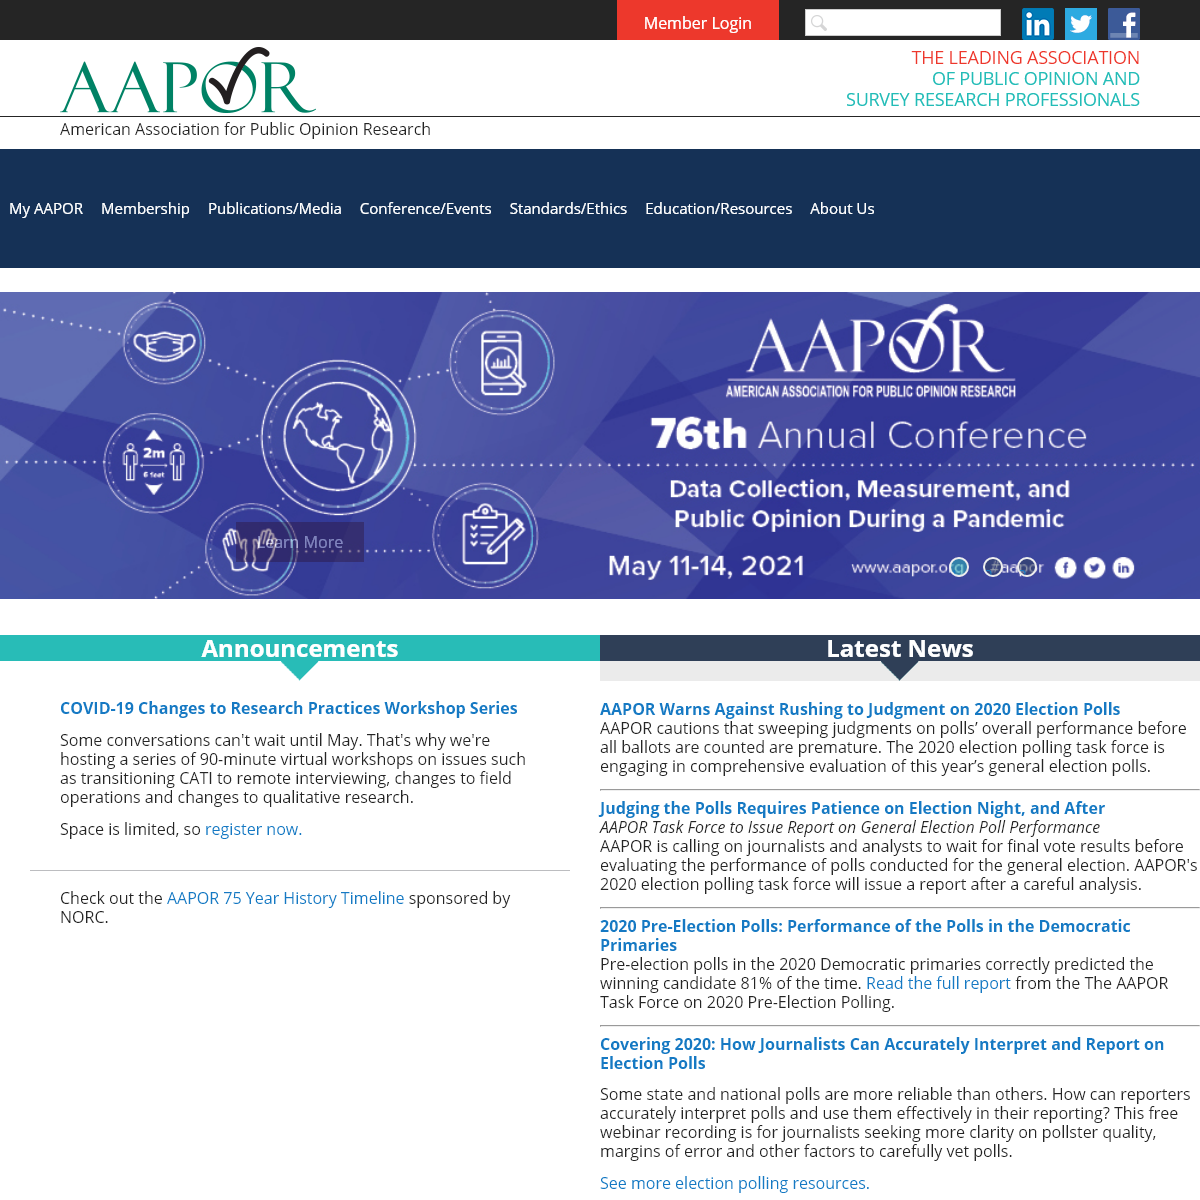 A complete backup of aapor.org